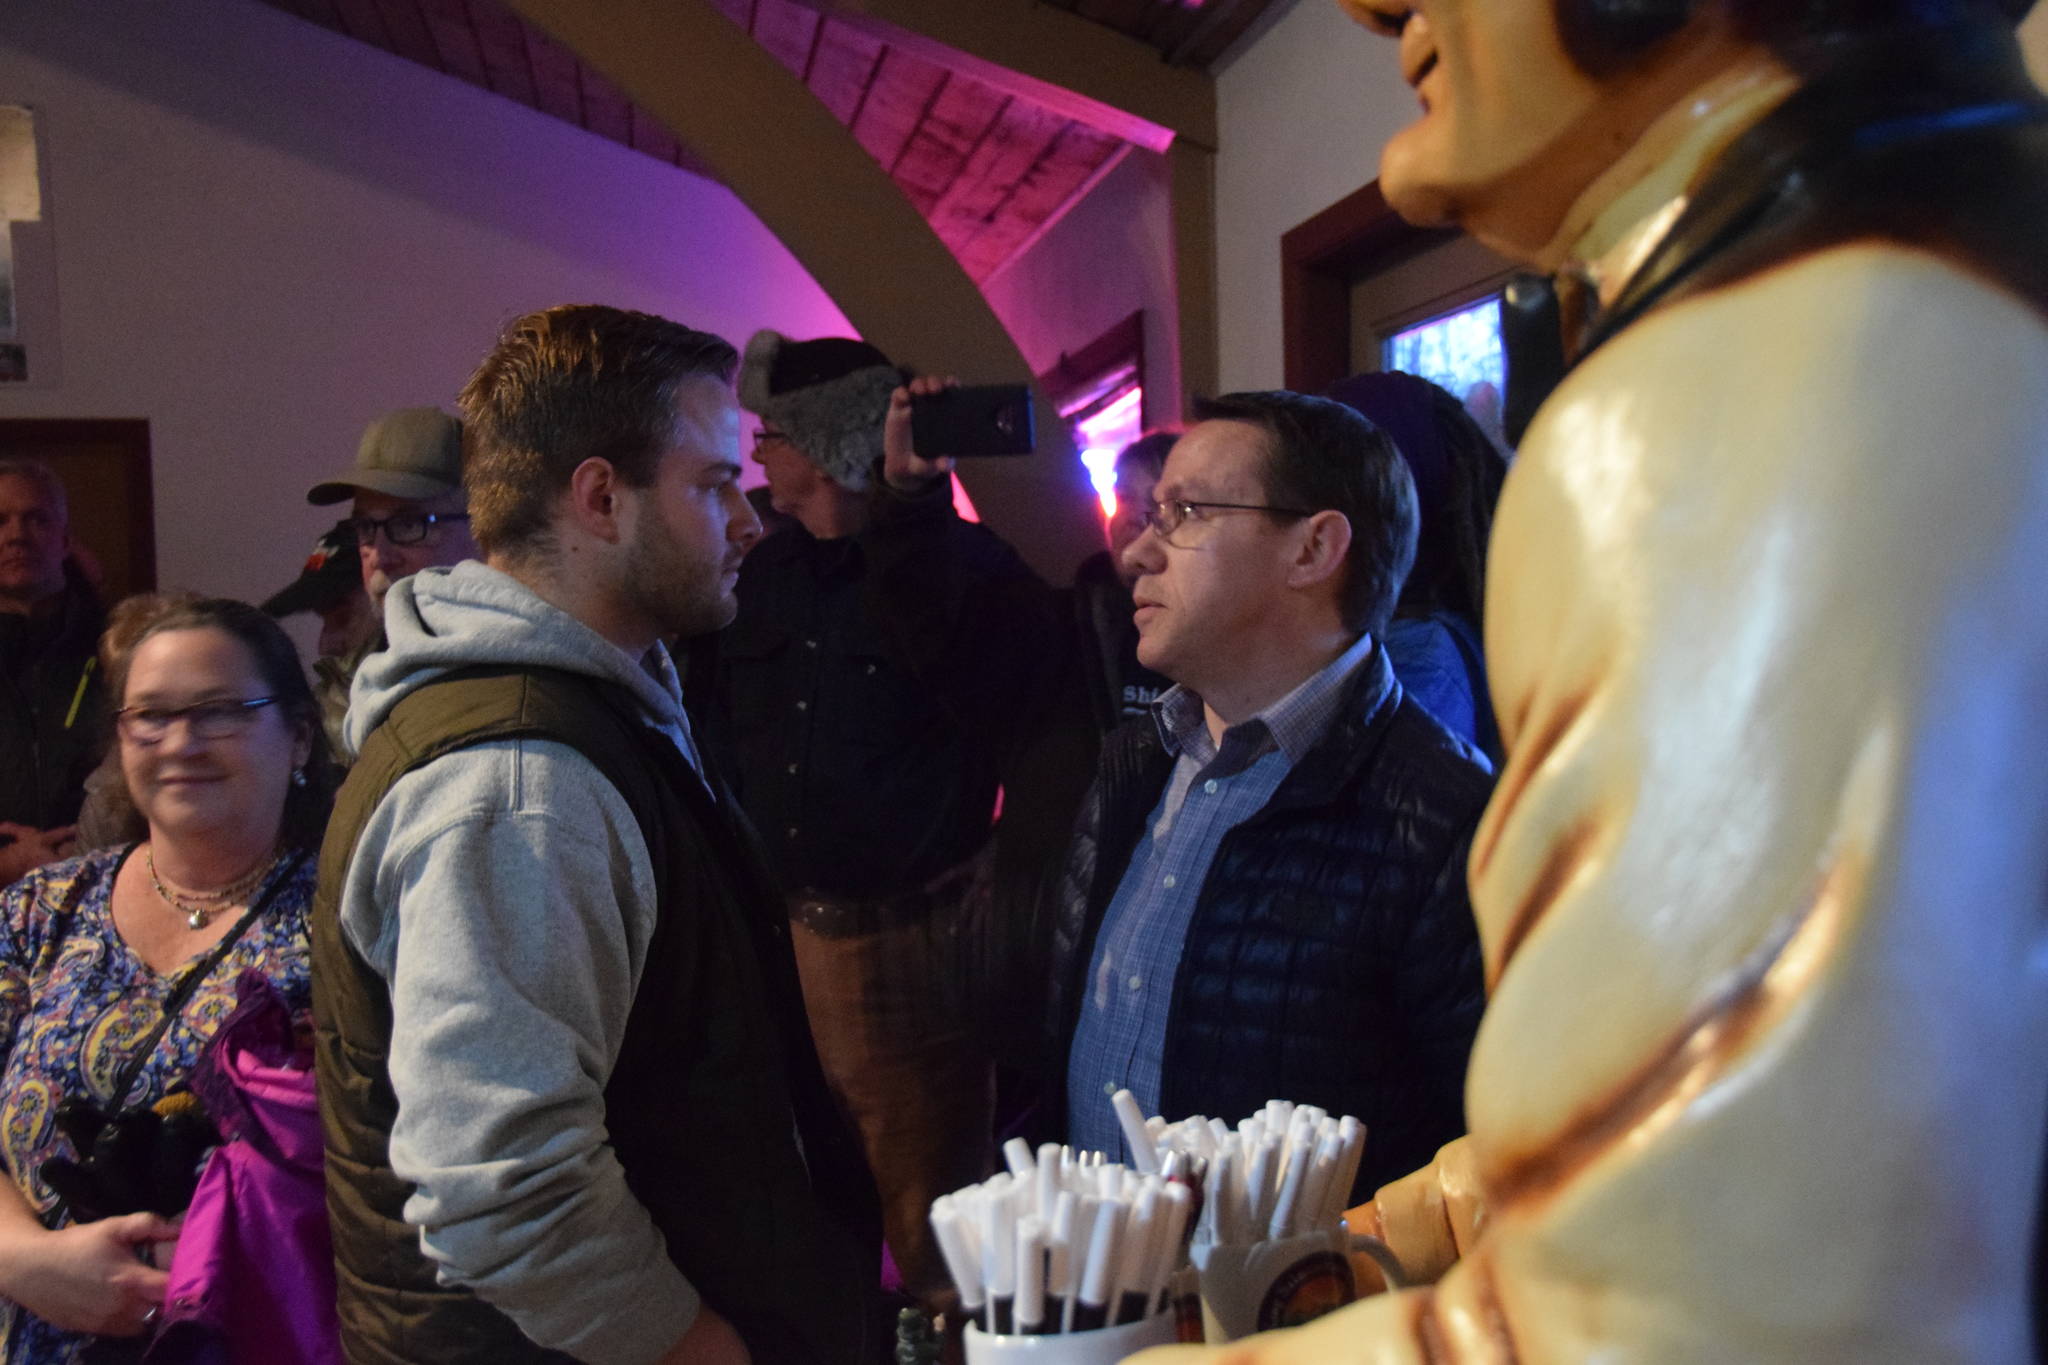 An aide, left, of Rep. Gary Knopp, R- Soldotna and a representative from Alaska Right to Life, right, confront each other during a town hall at the Kenai River Suites in Soldotna on Feb. 15, 2019. (Photo by Brian Mazurek/Peninsula Clarion)